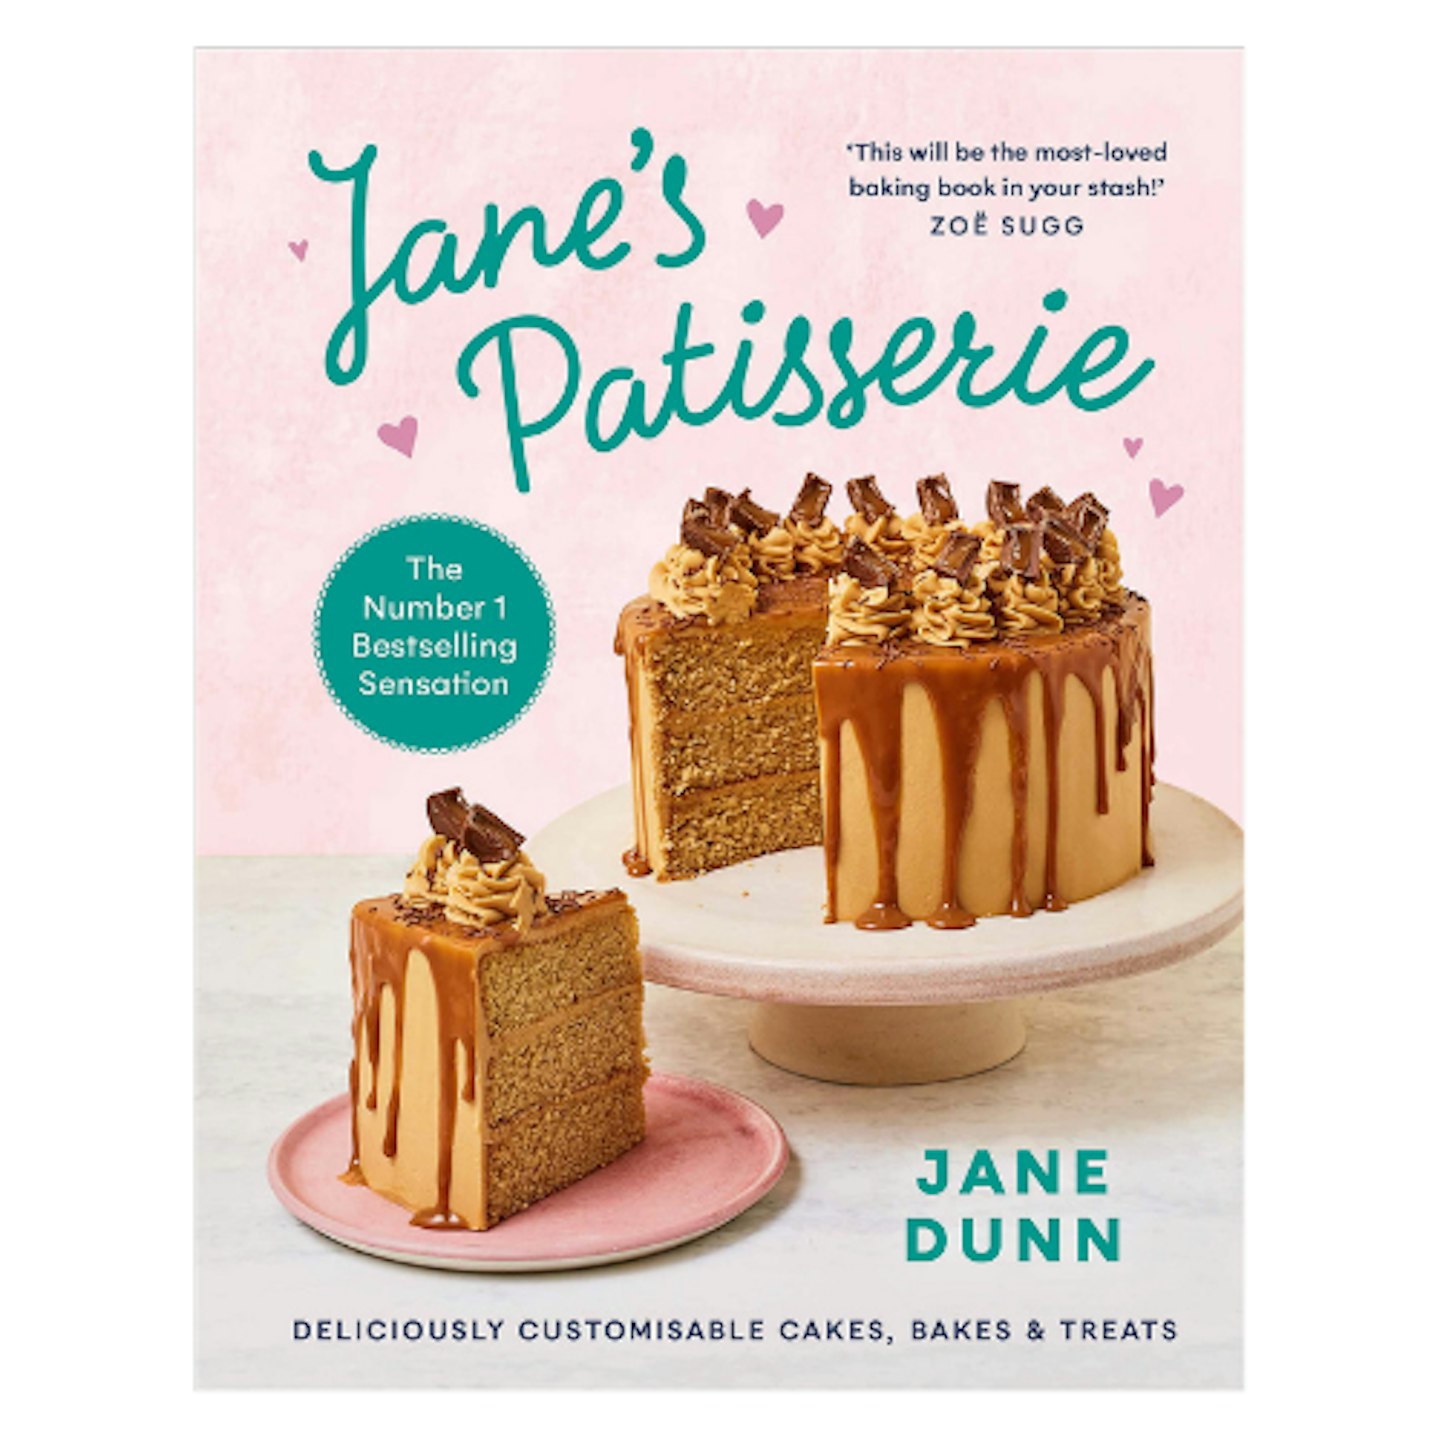 Jane’s Patisserie: Deliciously customisable cakes, bakes and treats. 